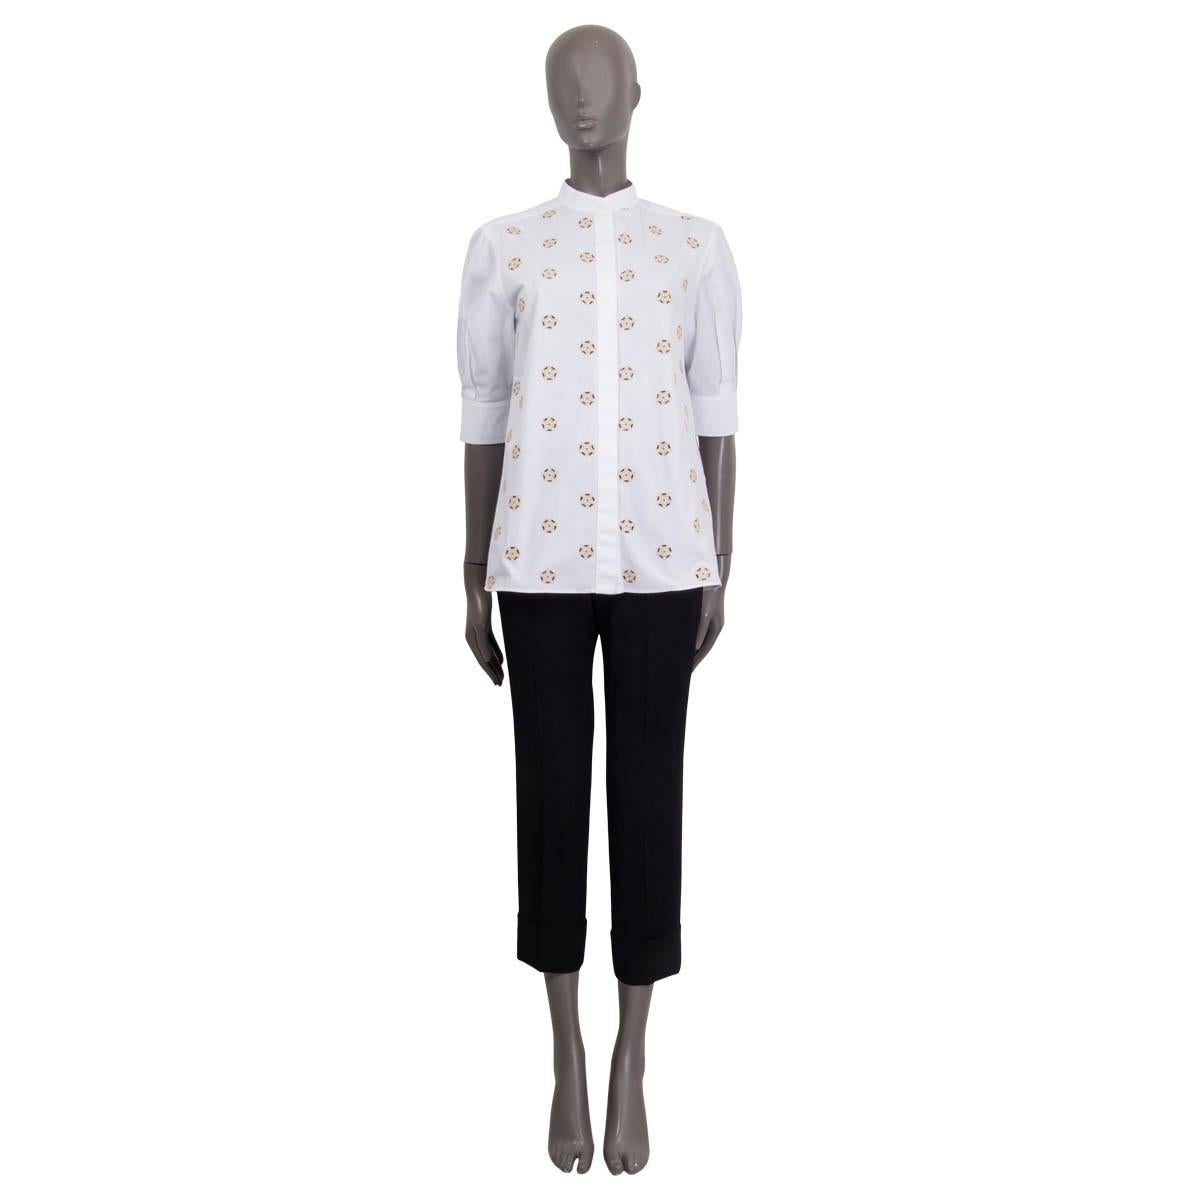 100% authentic Chloè blouse in white and beige cotton (100%). Features dots with broderie anglaise blooms, puffed sleeves and buttoned cuffs. Opens with eight buttons on the front. Unlined. Has been worn and is in excellent